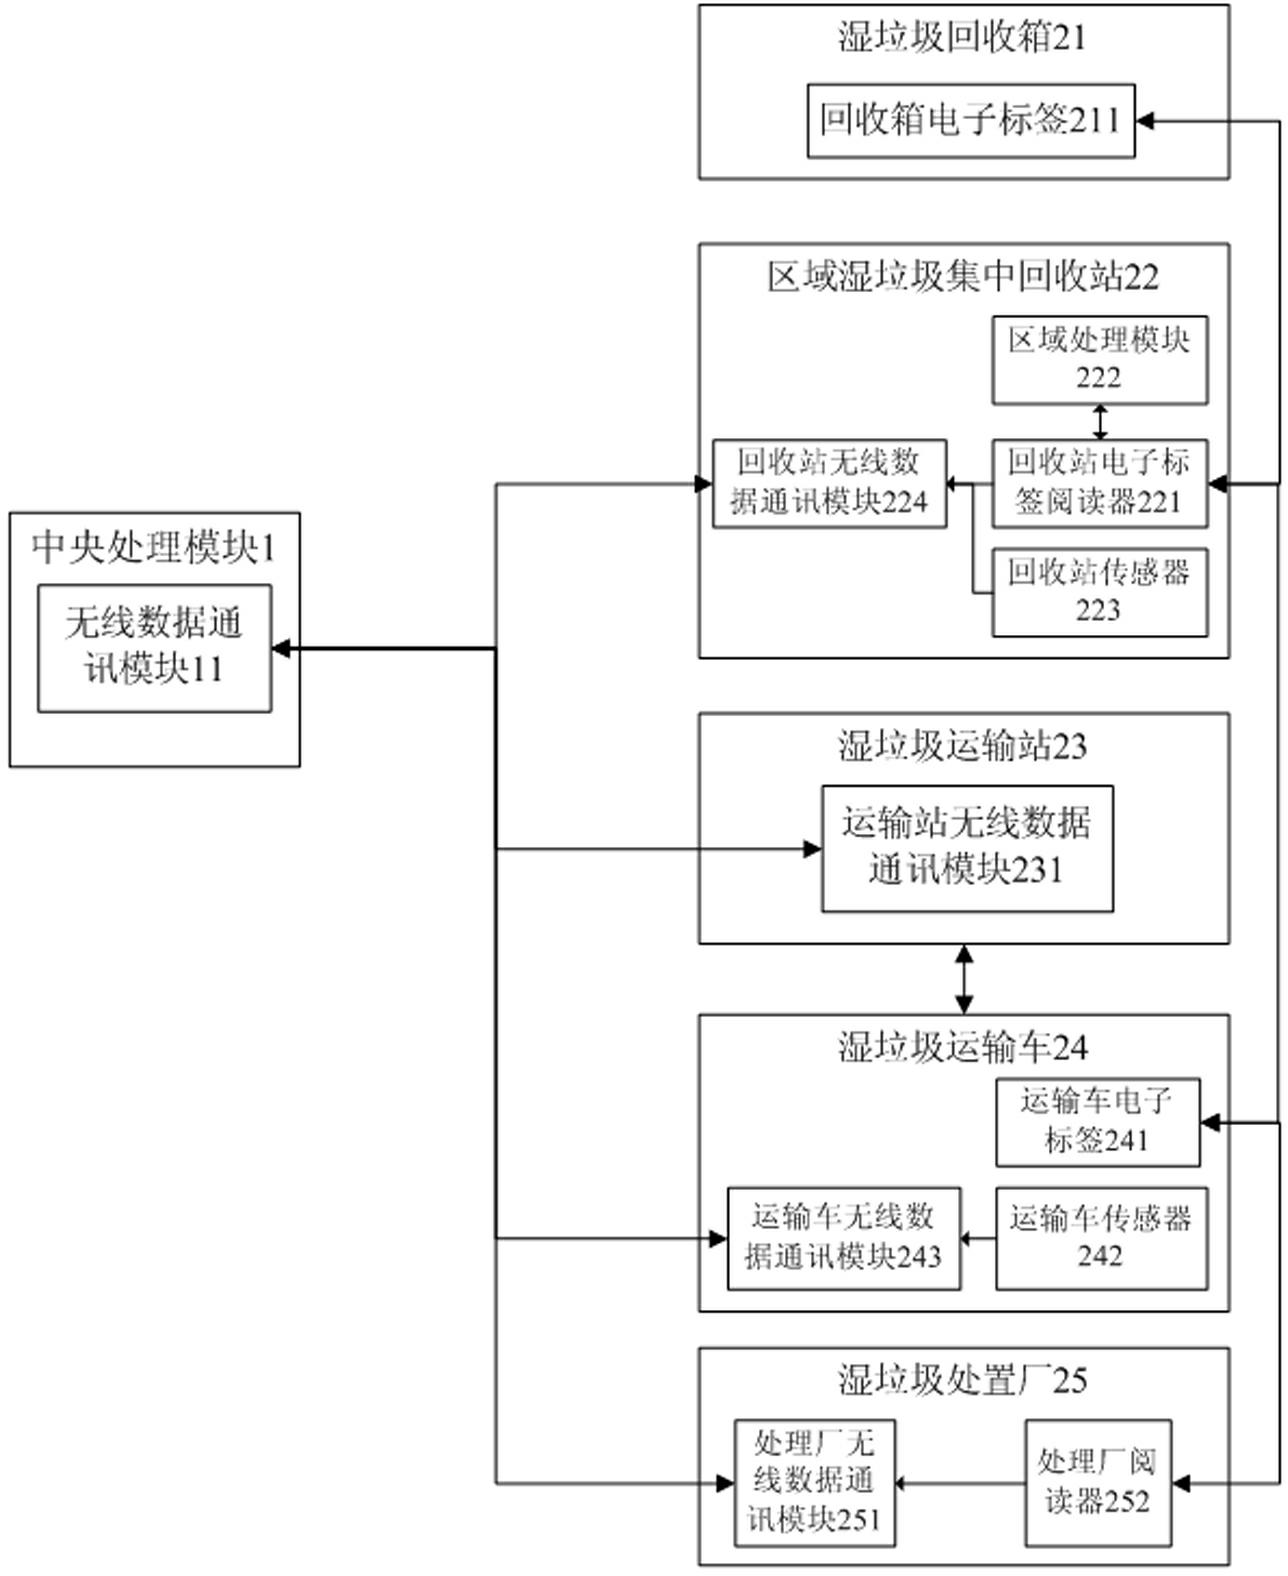 Urban waste classification treatment monitoring system based on Internet of Things and monitoring method thereof